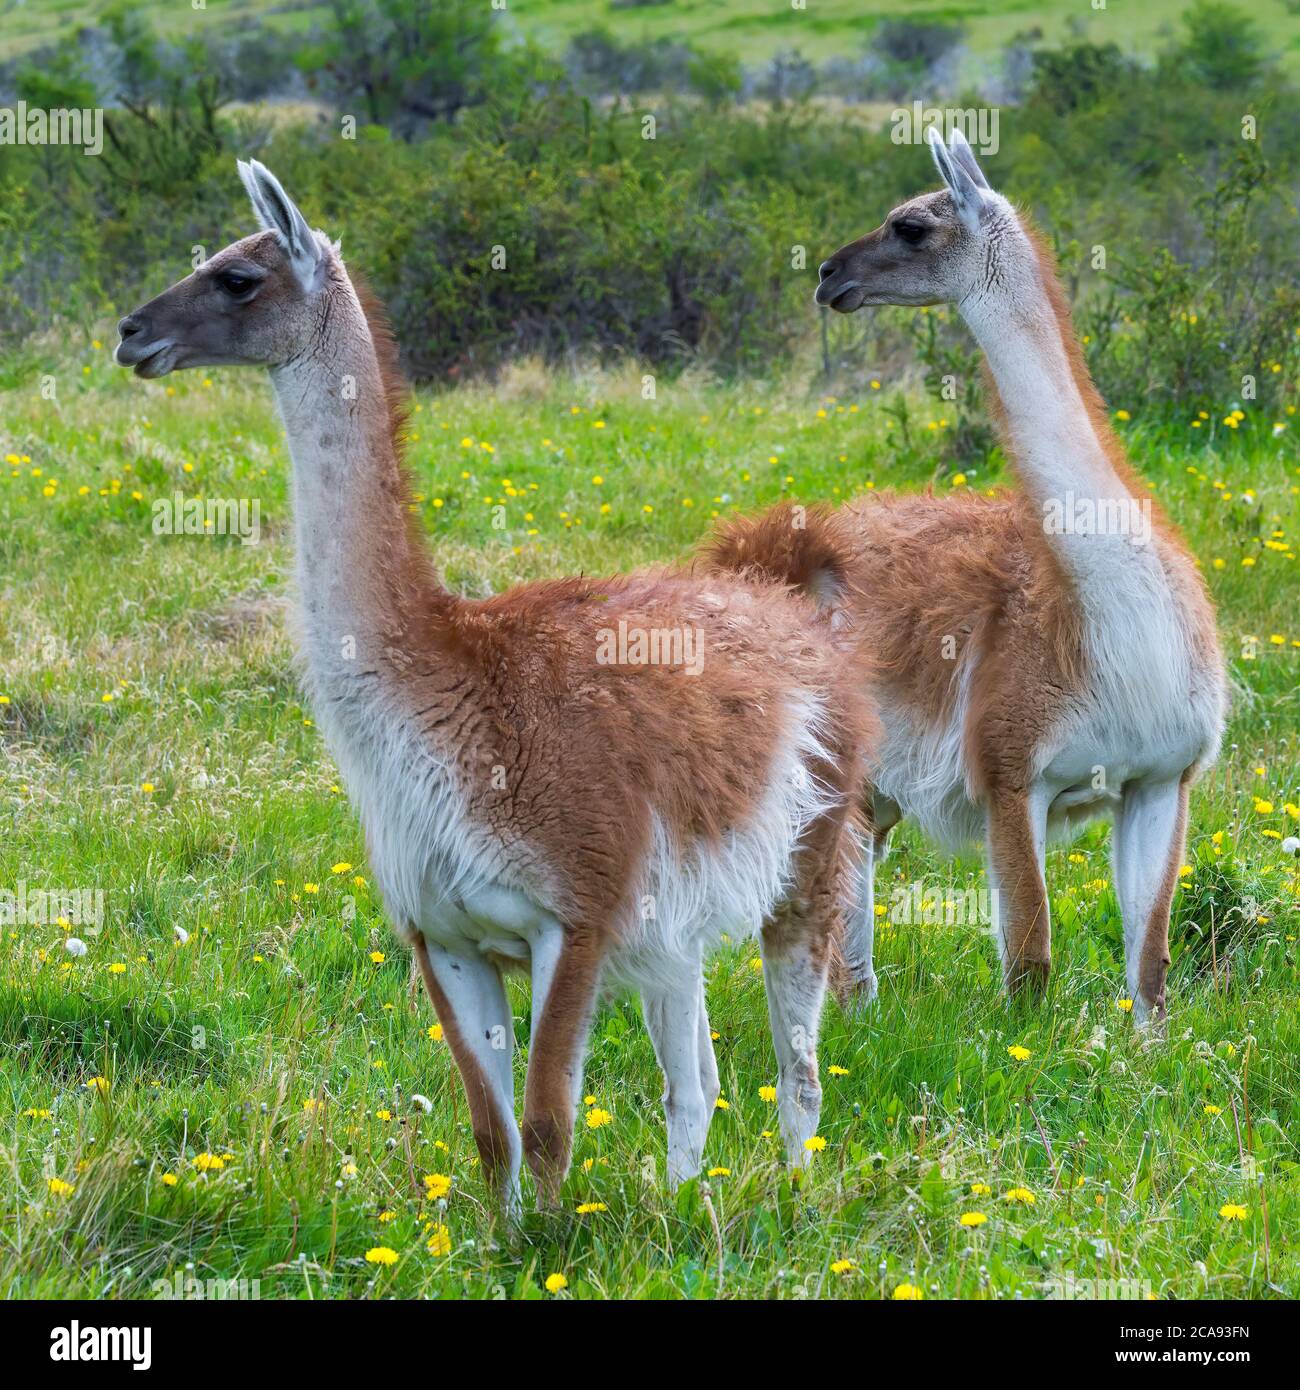 Two guanacos (Lama guanicoe), Patagonia National Park, Chacabuco Valley, Aysen Region, Patagonia, Chile, South America Stock Photo